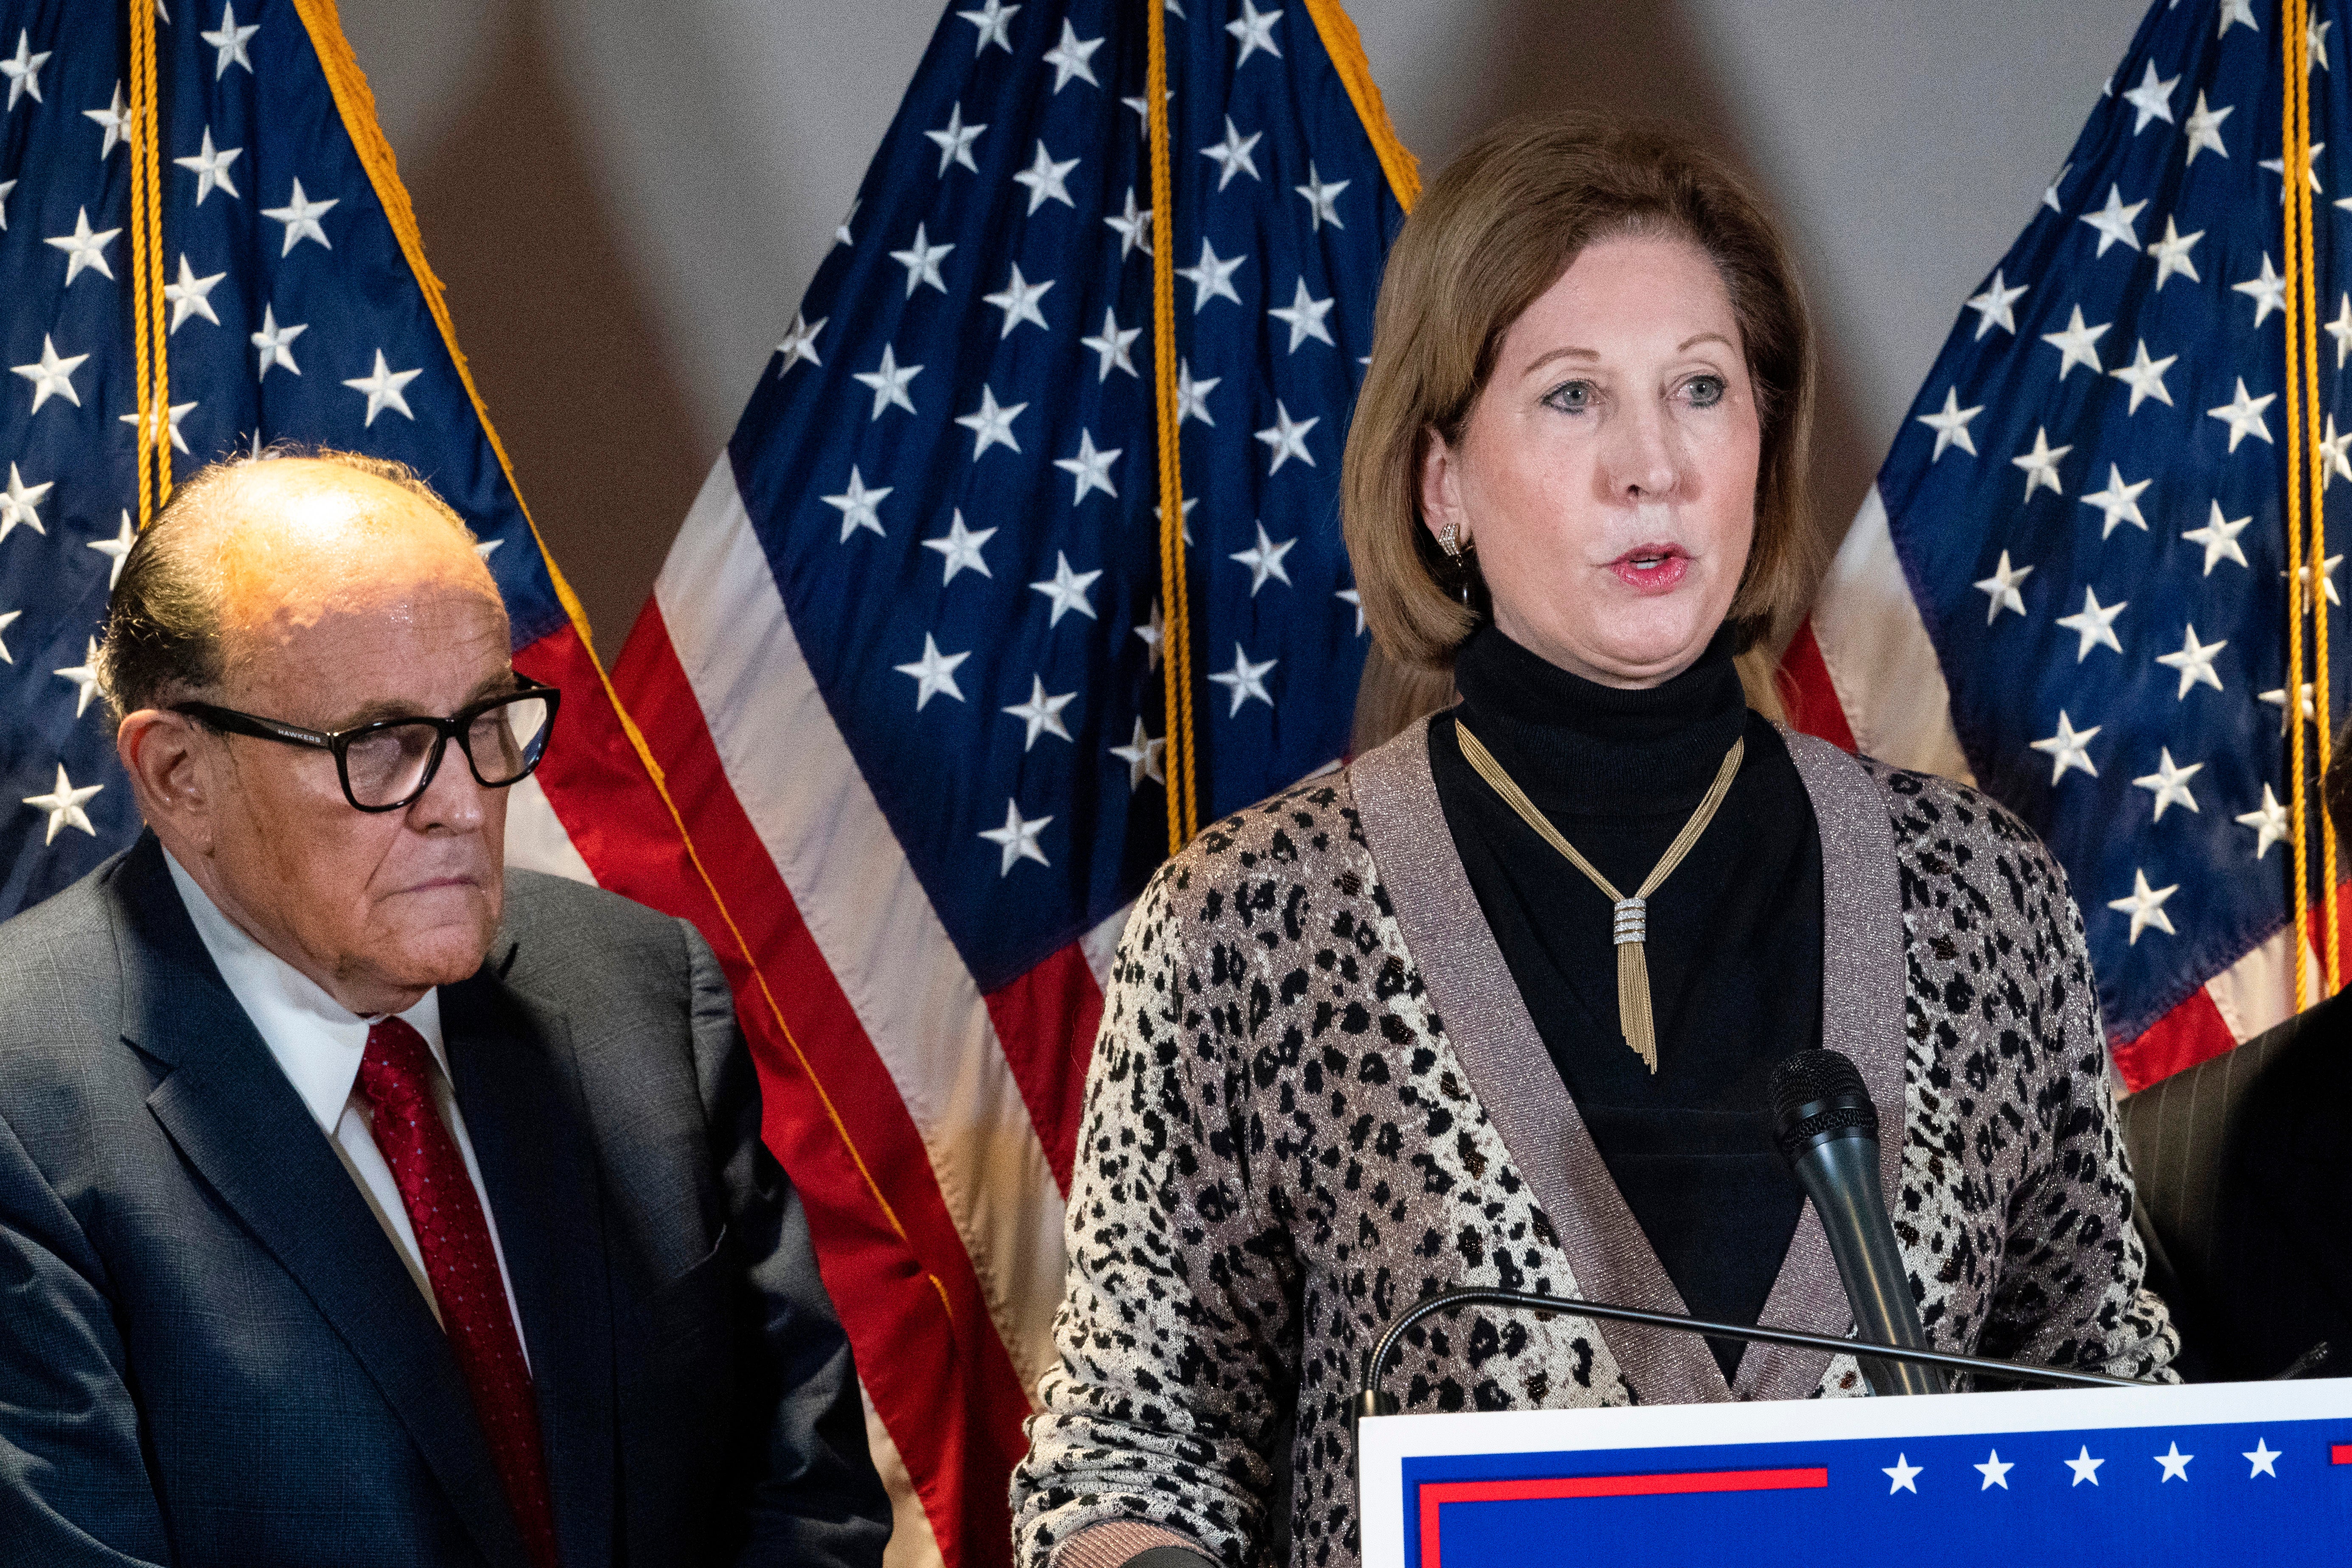 Sidney Powell and Rudy Giuliani speak at an infamous post-election press conference at the Republican National Committee headquarters on 19 November, 2020.